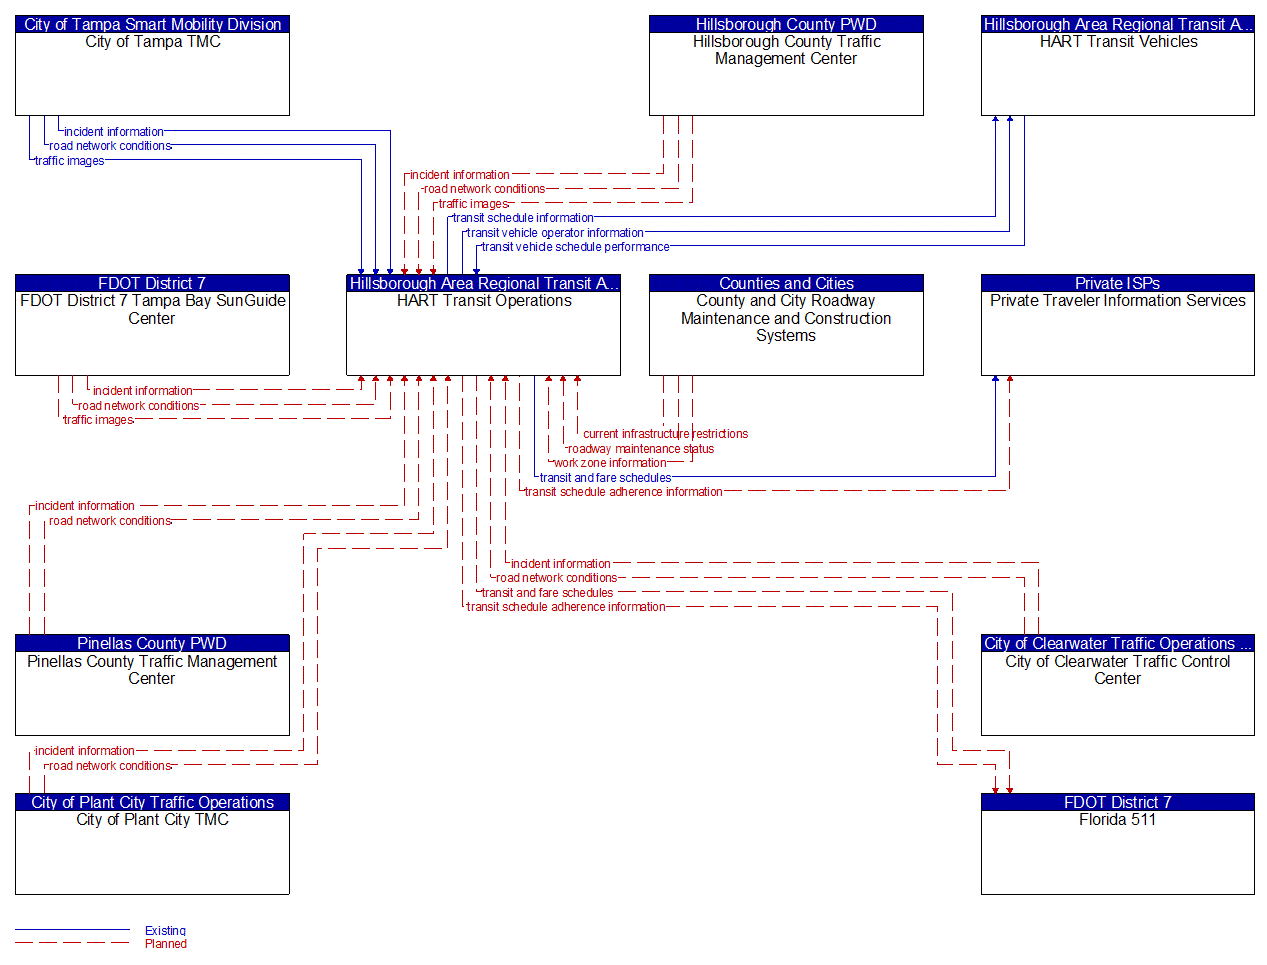 Service Graphic: Transit Fixed-Route Operations (HART Transit)